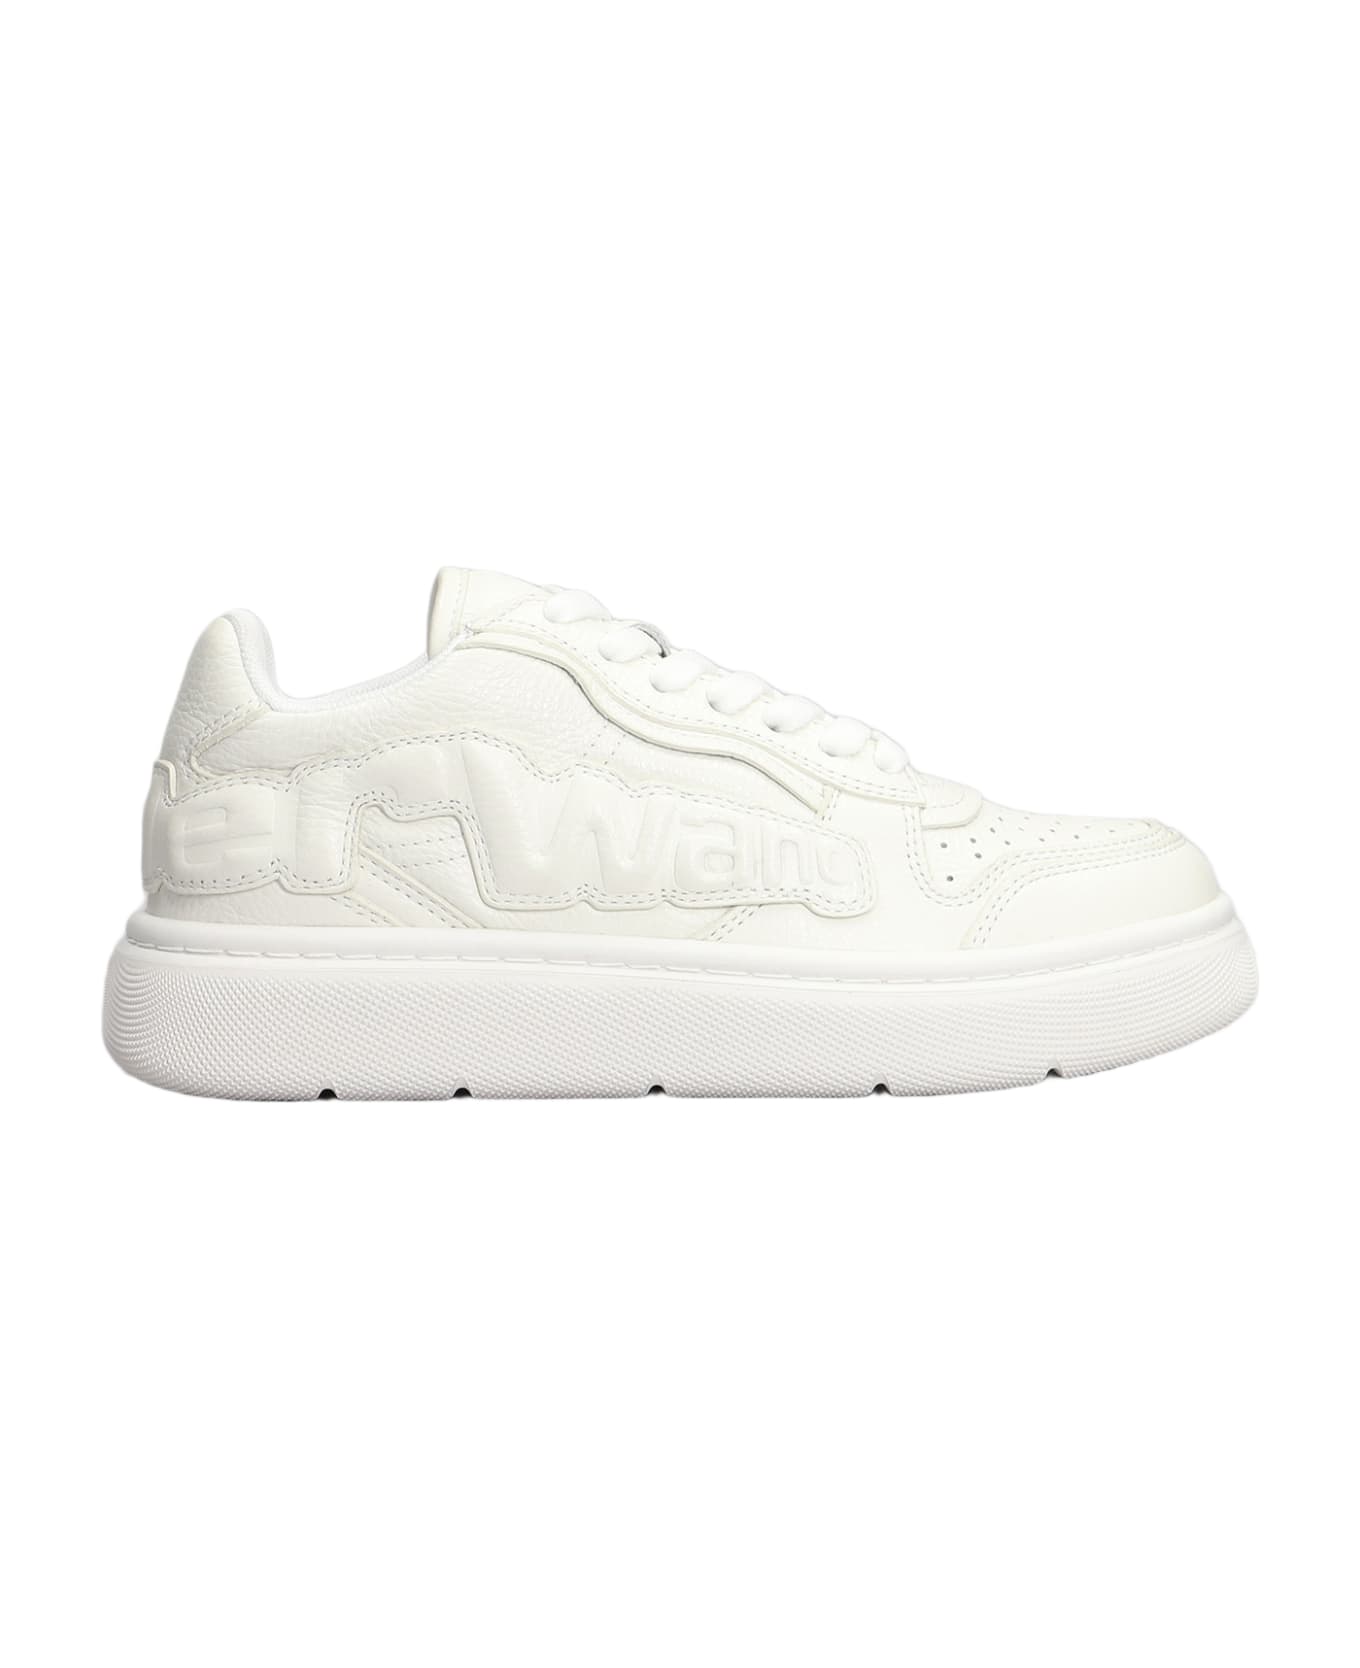 Alexander Wang Sneakers In White Leather - white